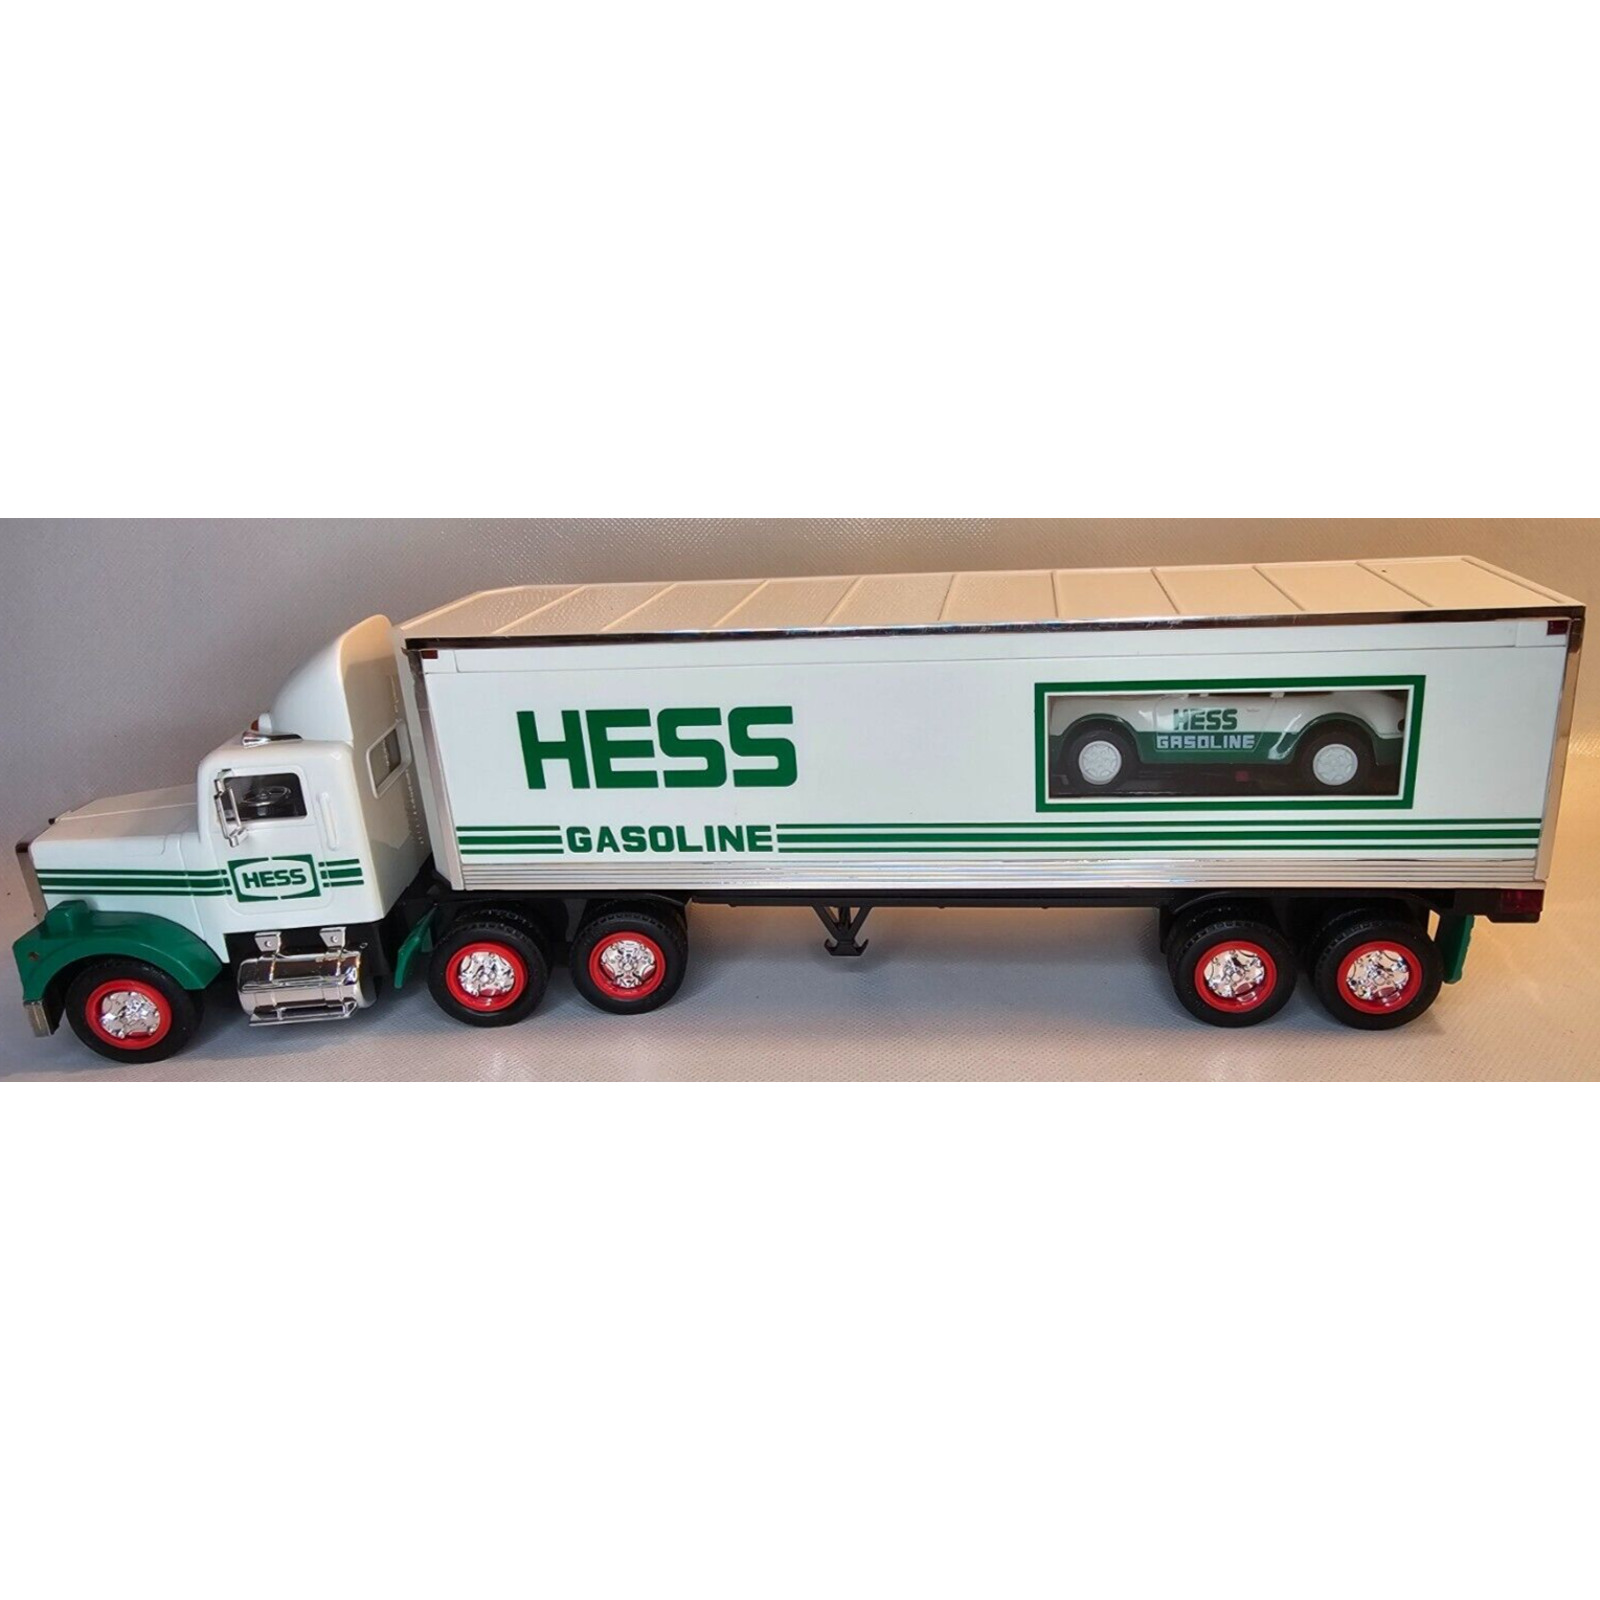 Tested & Working 1992 Hess 18 Wheeler And Racer W/ Original Box. 